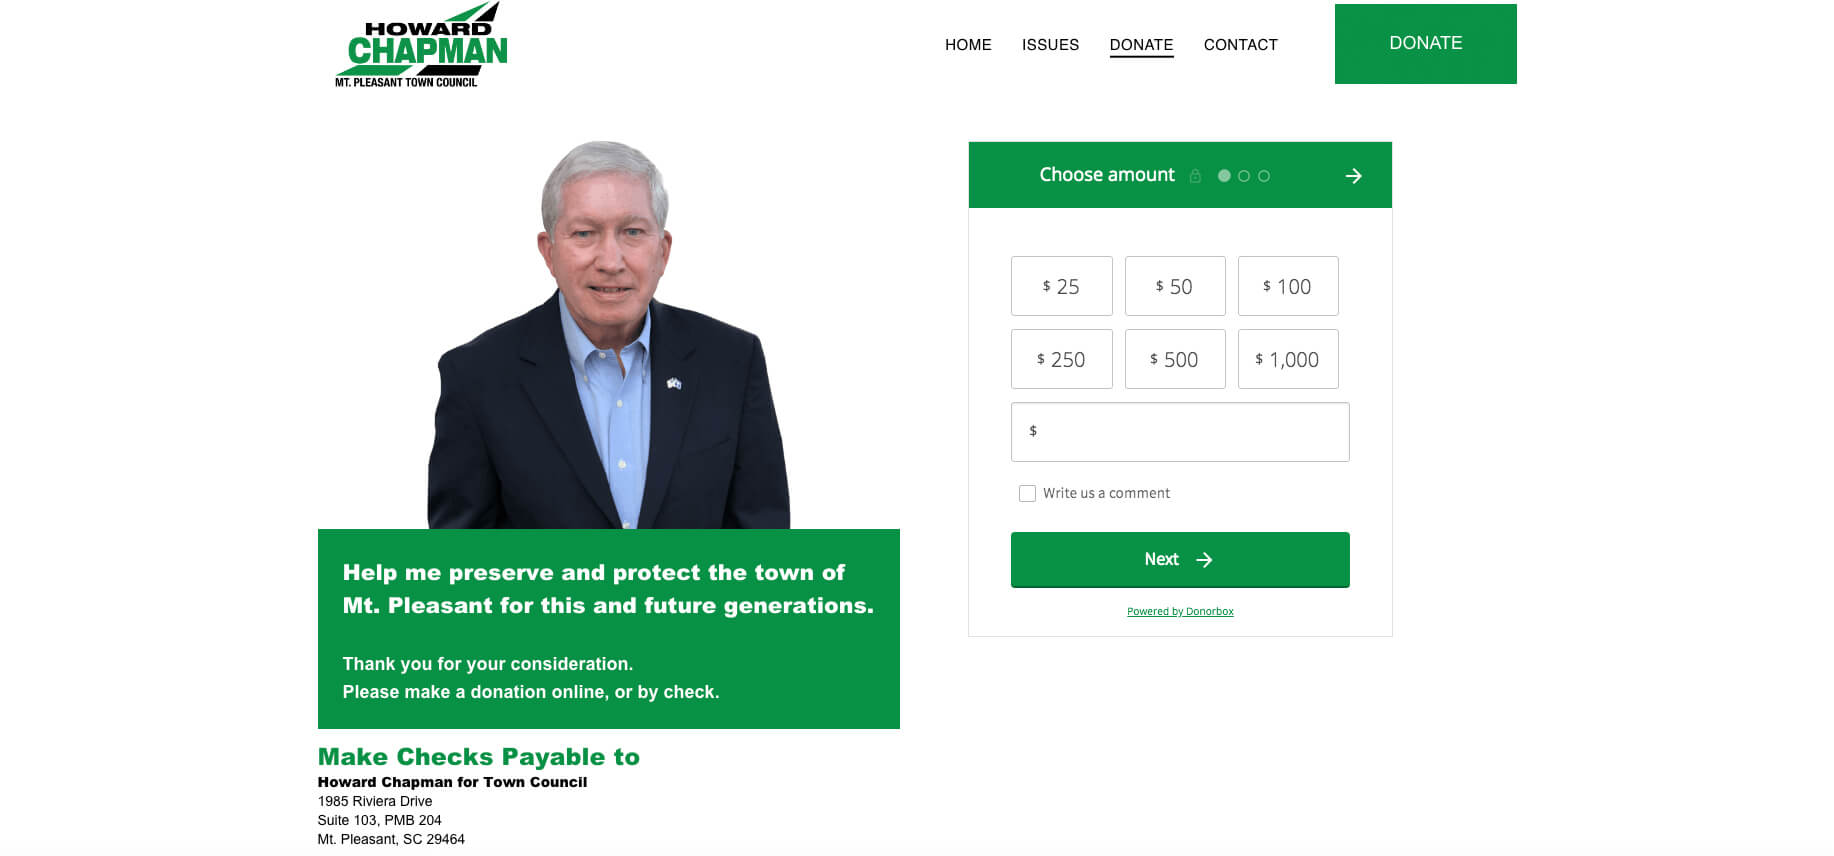 howard chapman town council website for campaign